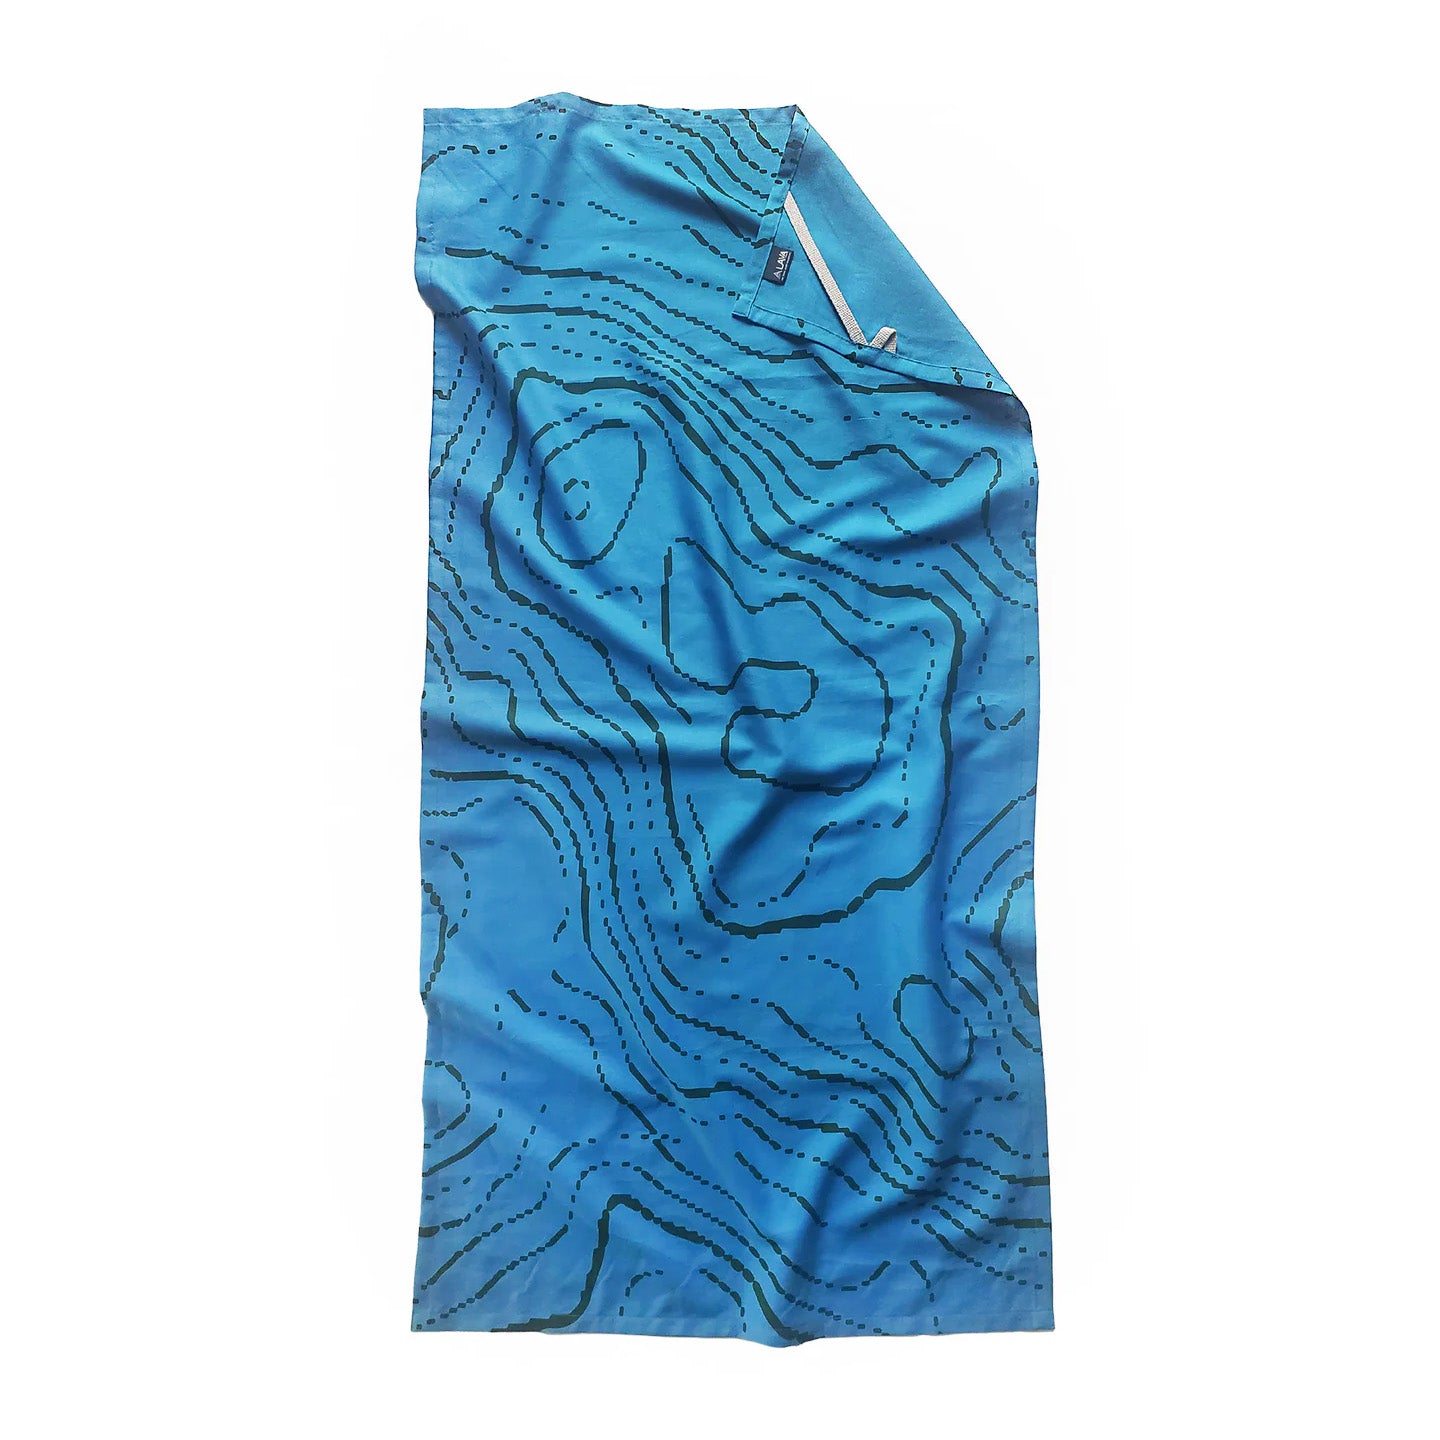 Lava linens bath sheet with topographic print.